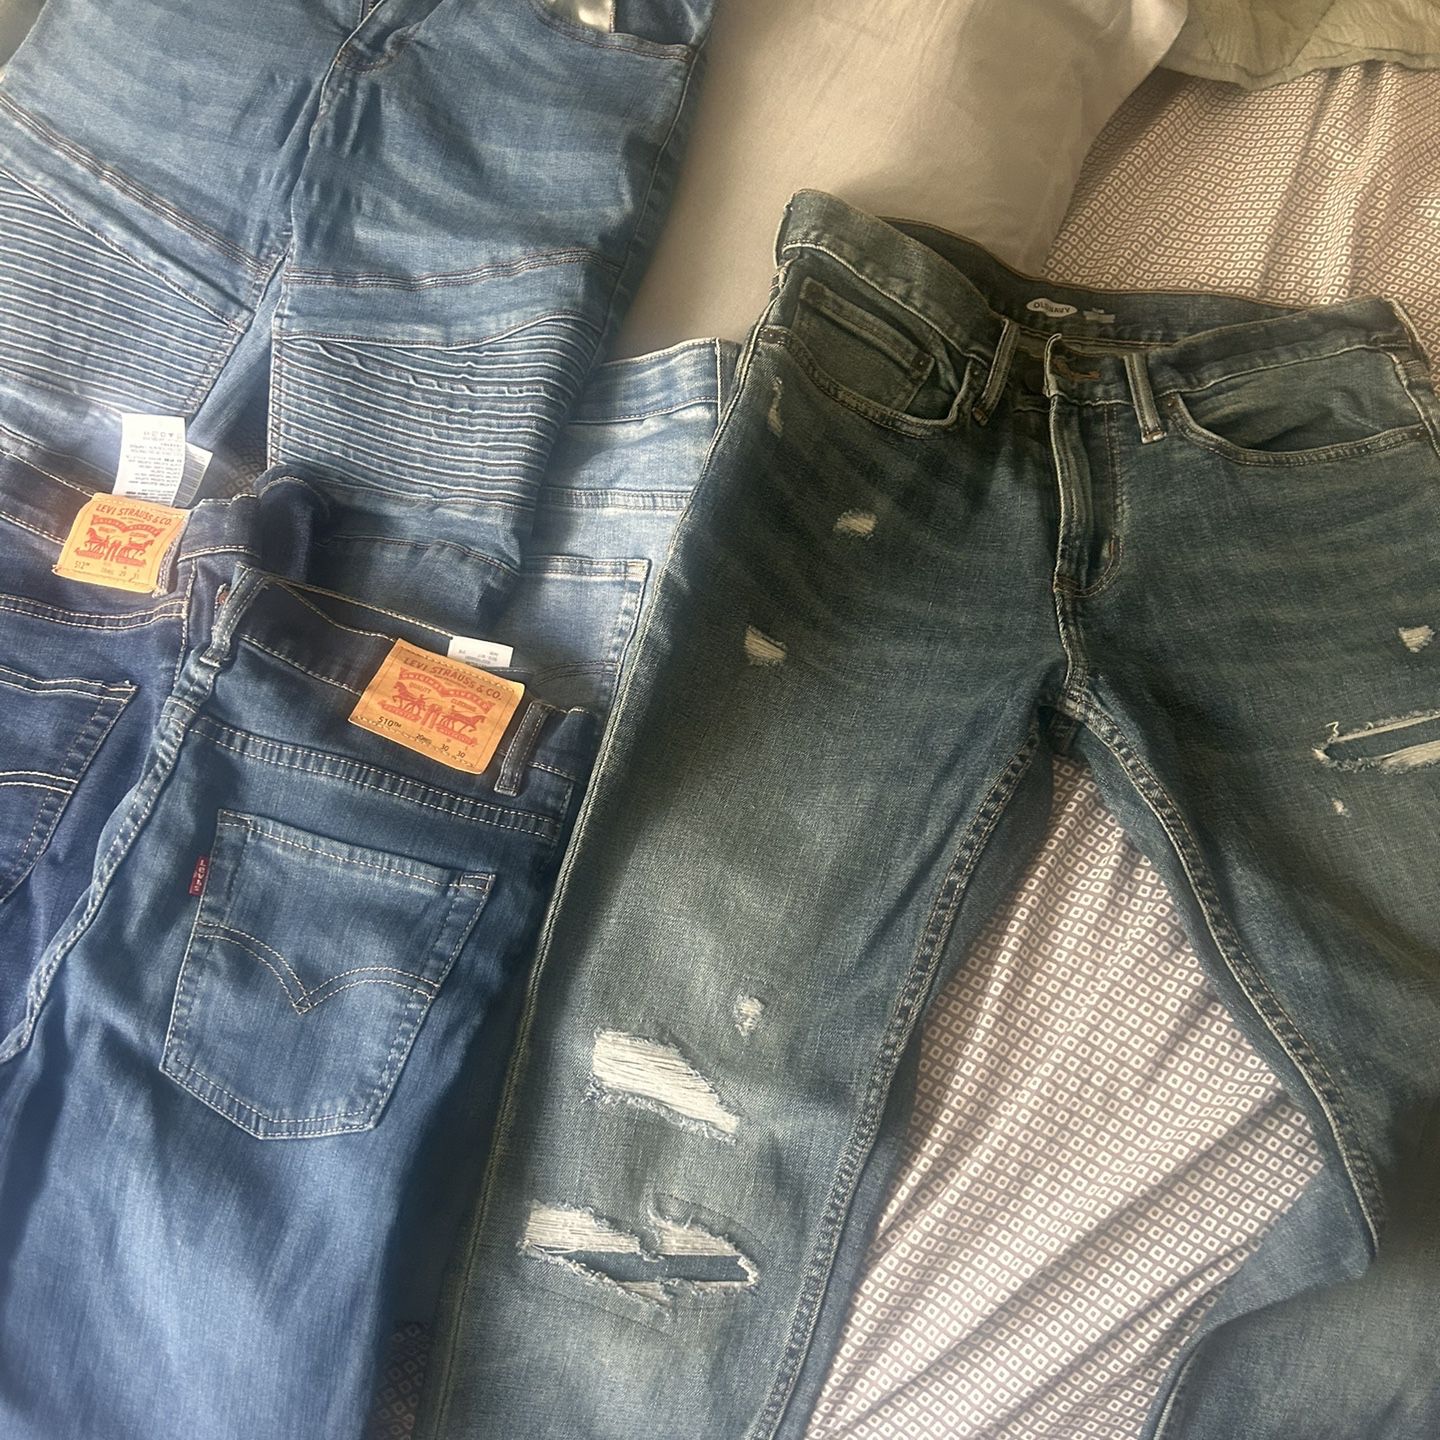 Teen jeans 6 Pair For $25